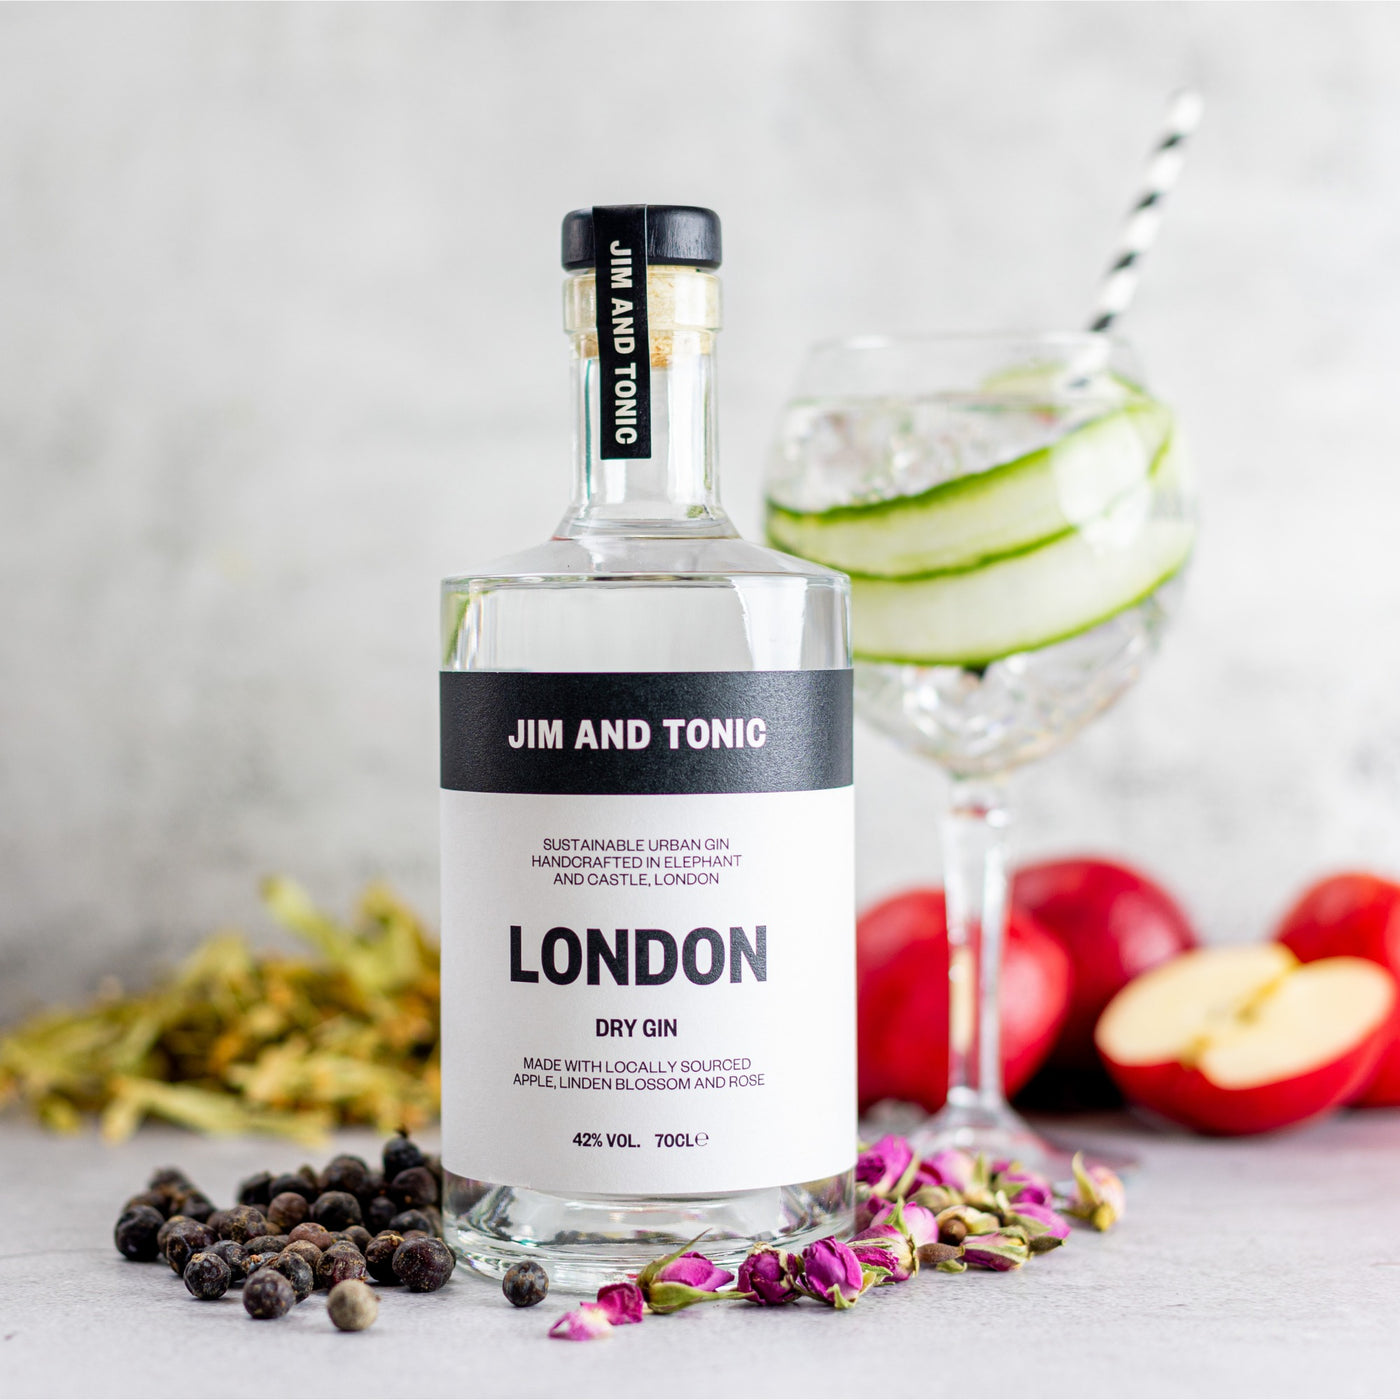 London Dry Gin 70cl by Jim and Tonic Distillery in London